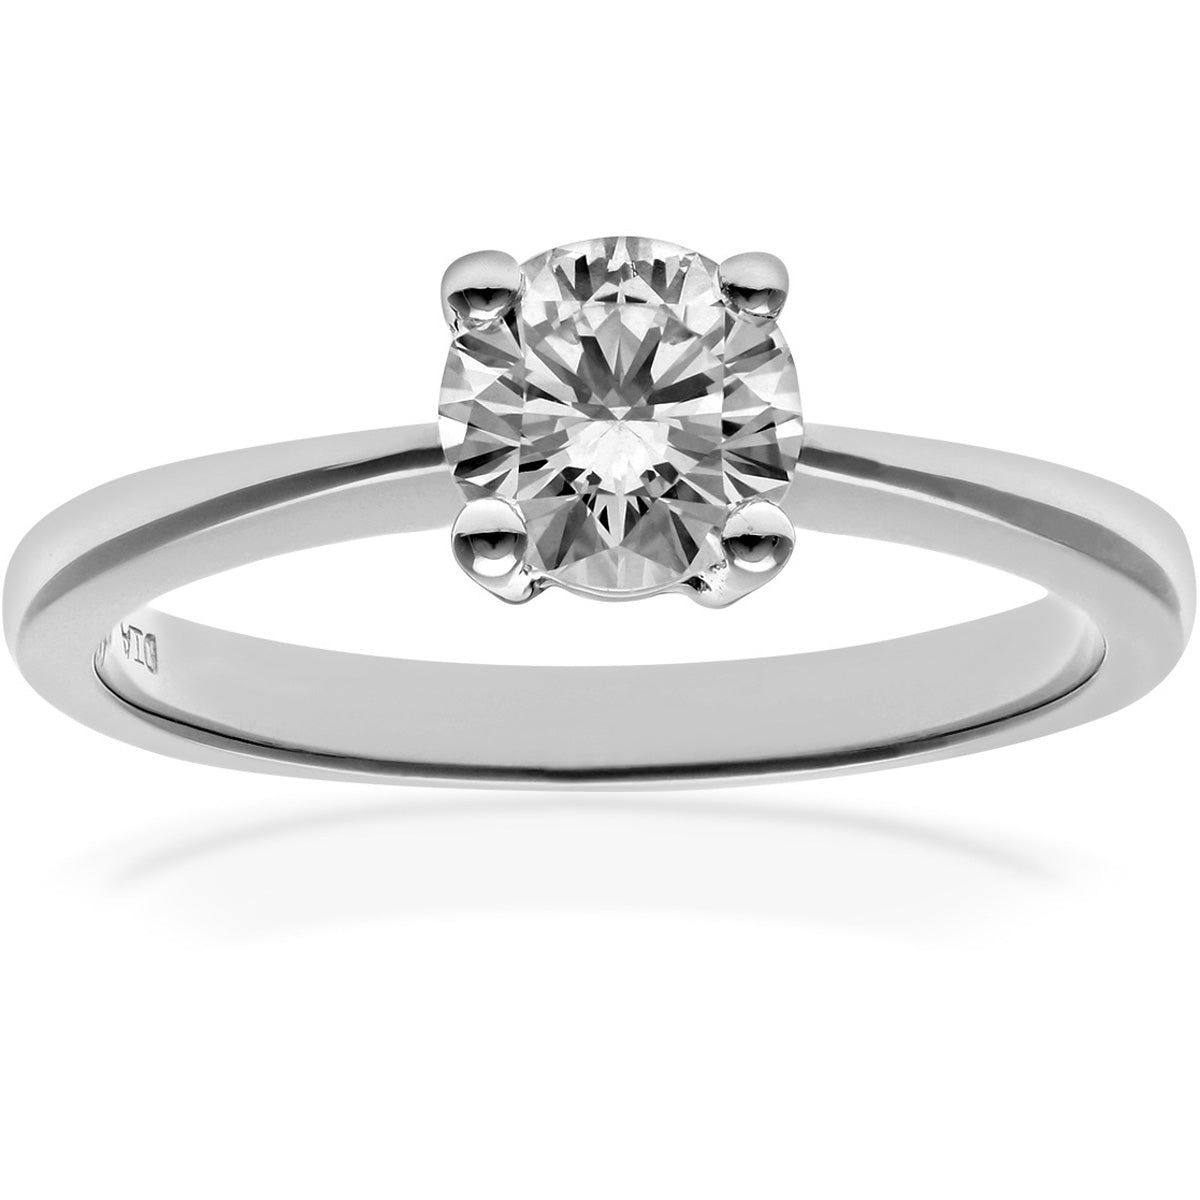 18ct White Gold  3/4ct Diamond 4 Claw Solitaire Engagement Ring - PR0AXL4689W18HSI